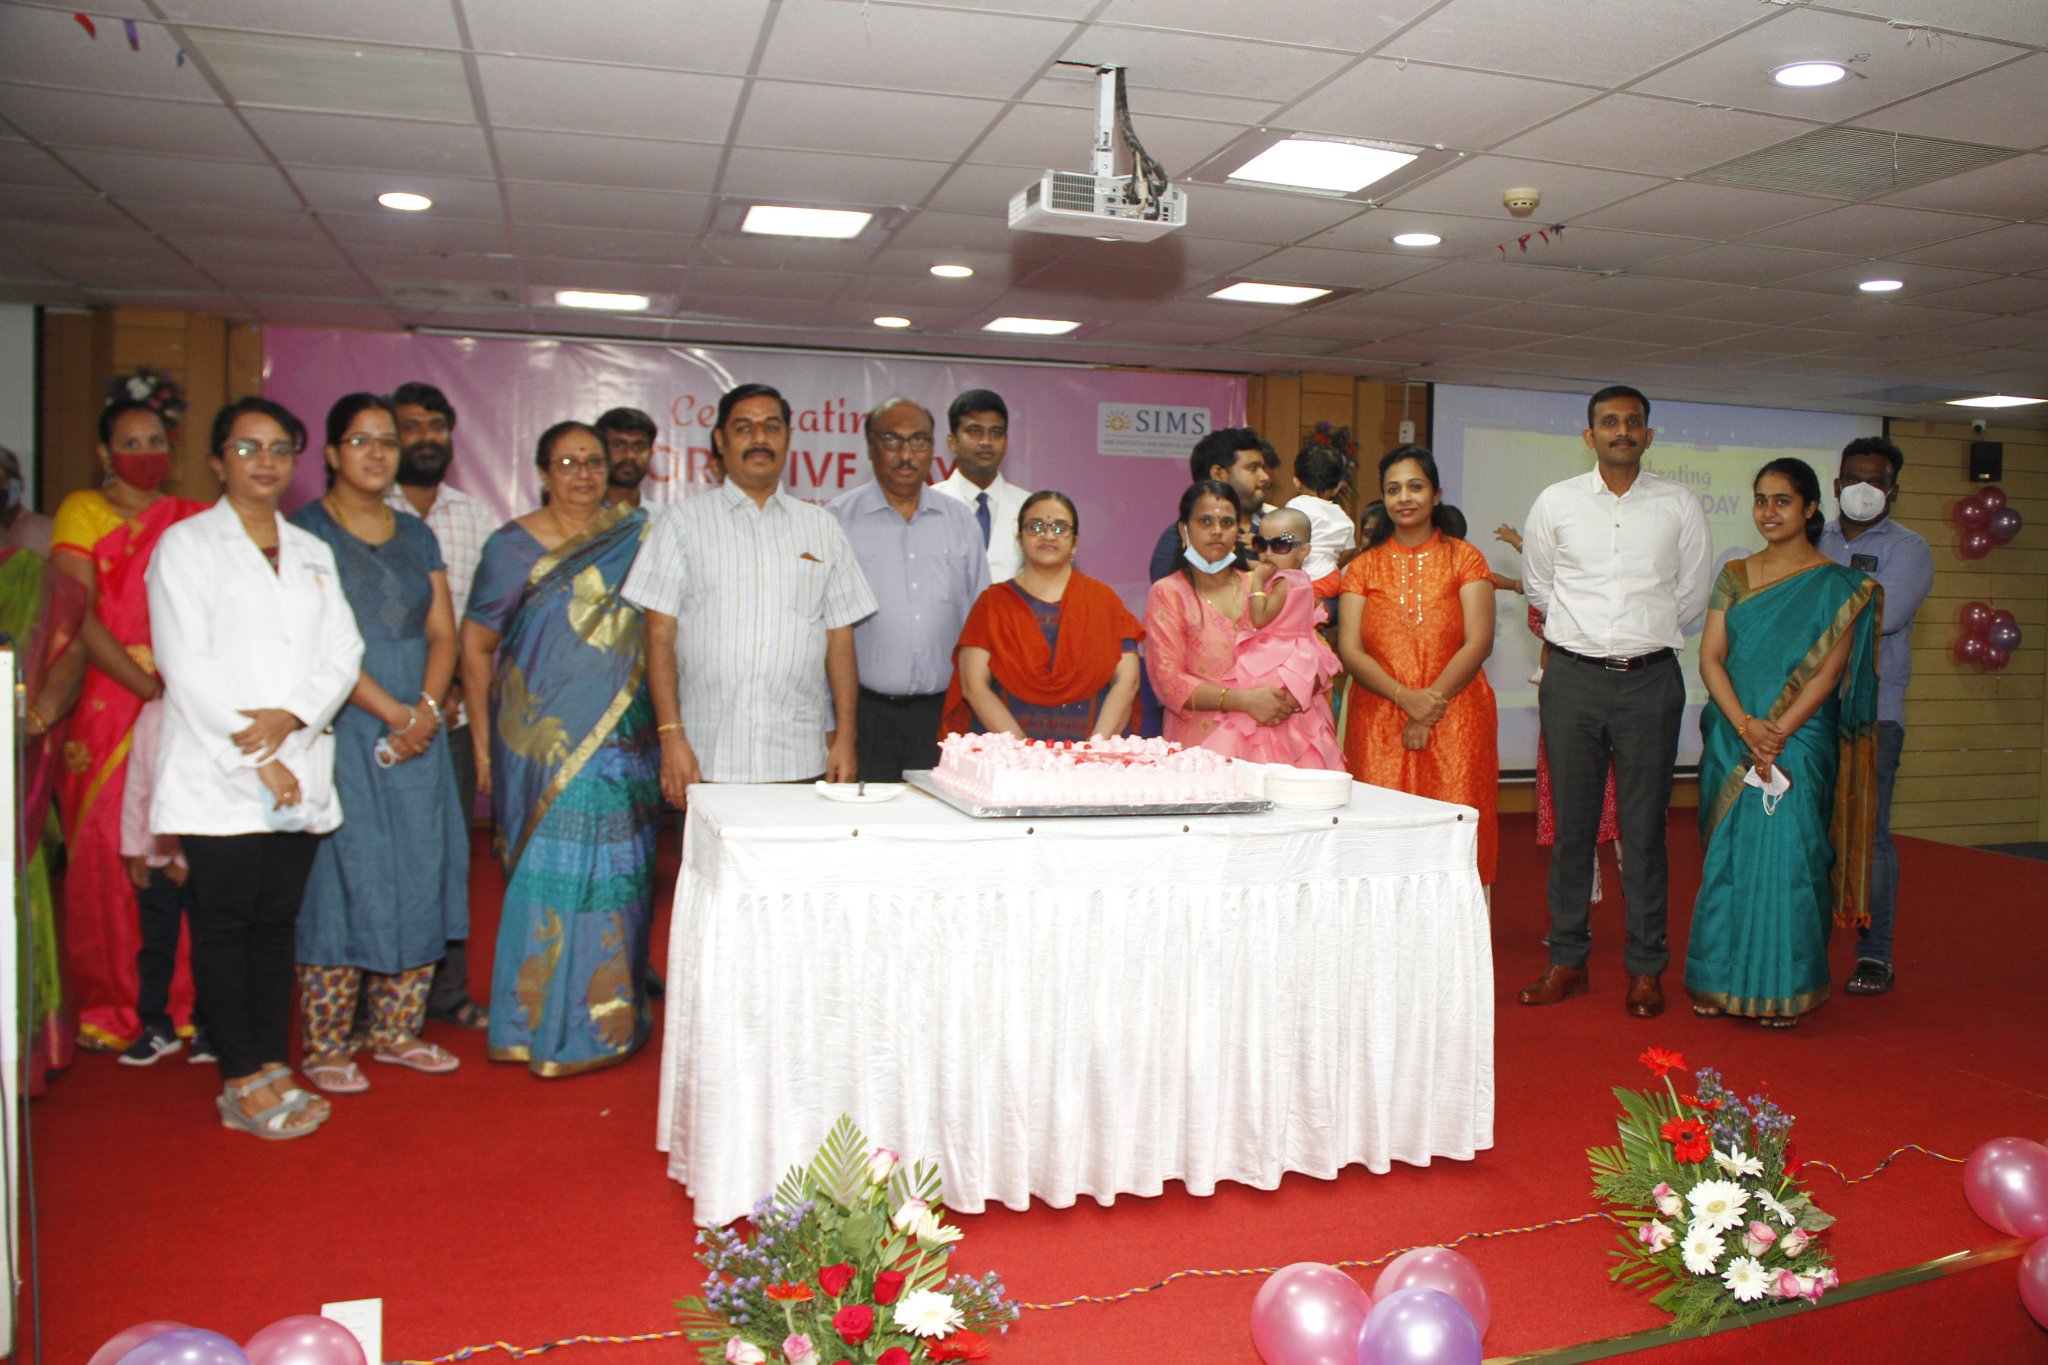  A special cake cutting ceremony was organize with parents and kids at SIMS Hospital